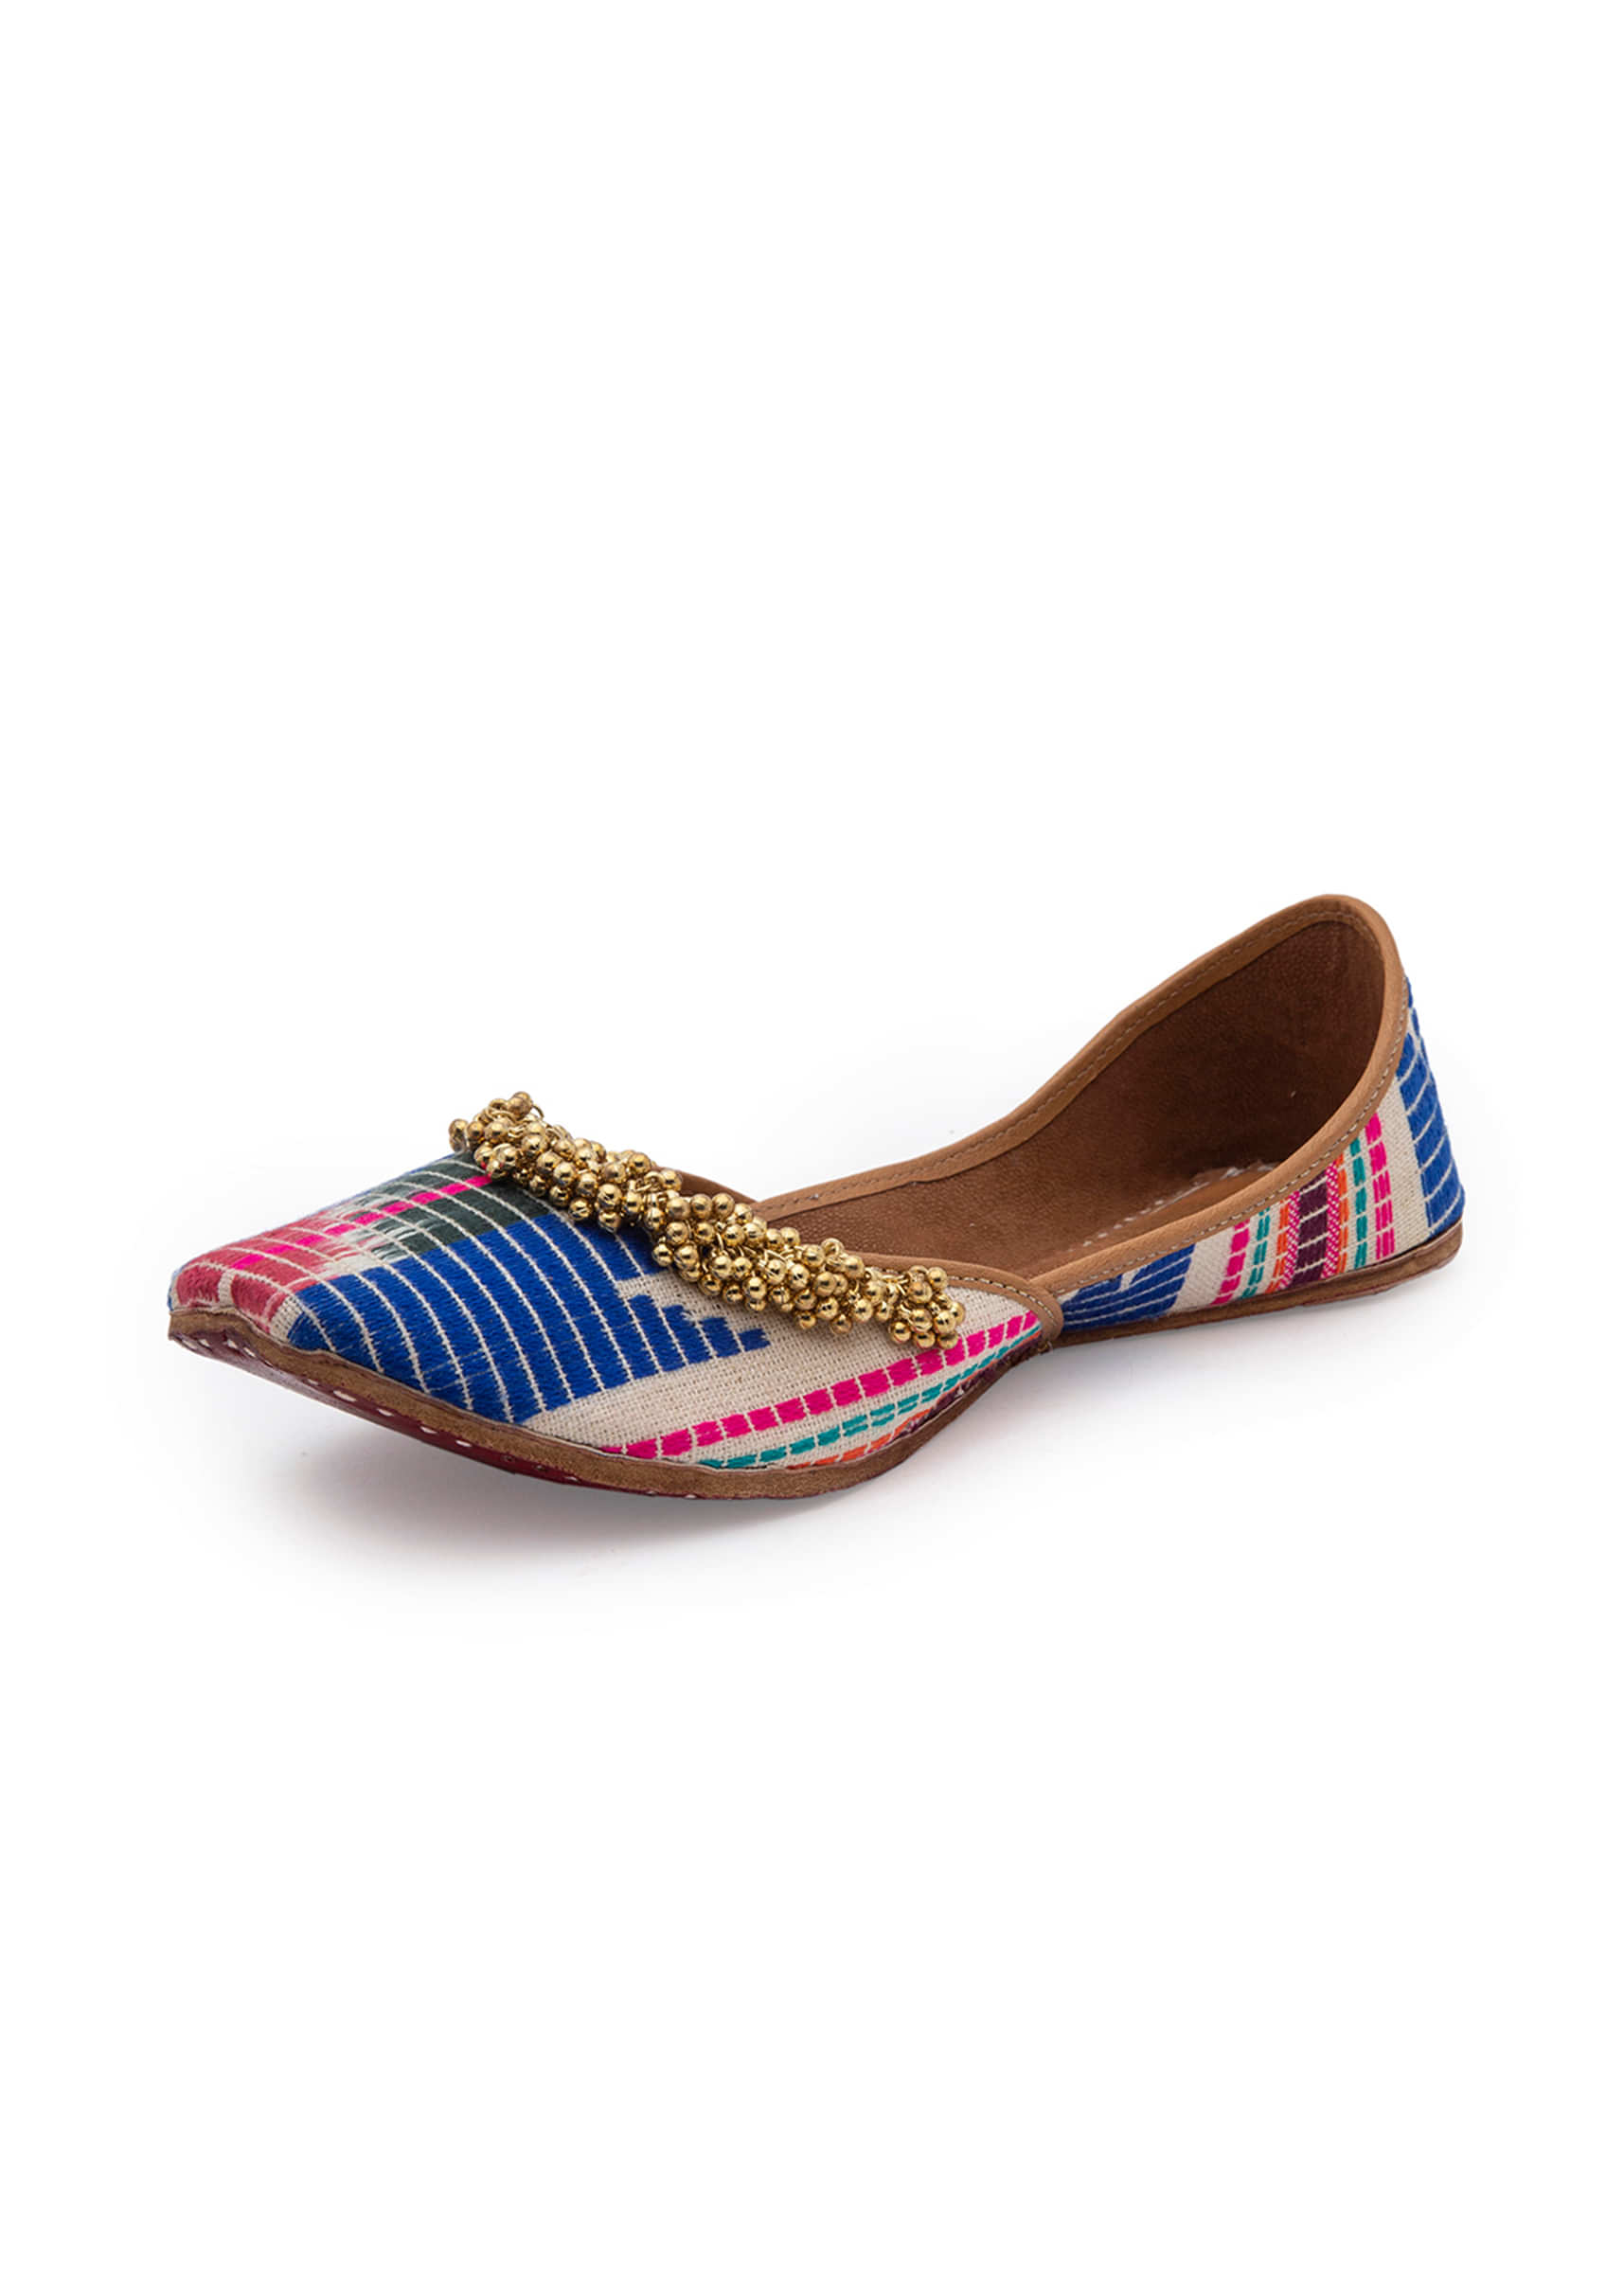 Multi Colored Juttis In Jacquard With Tiny Ghungroos And Print By 5 Elements